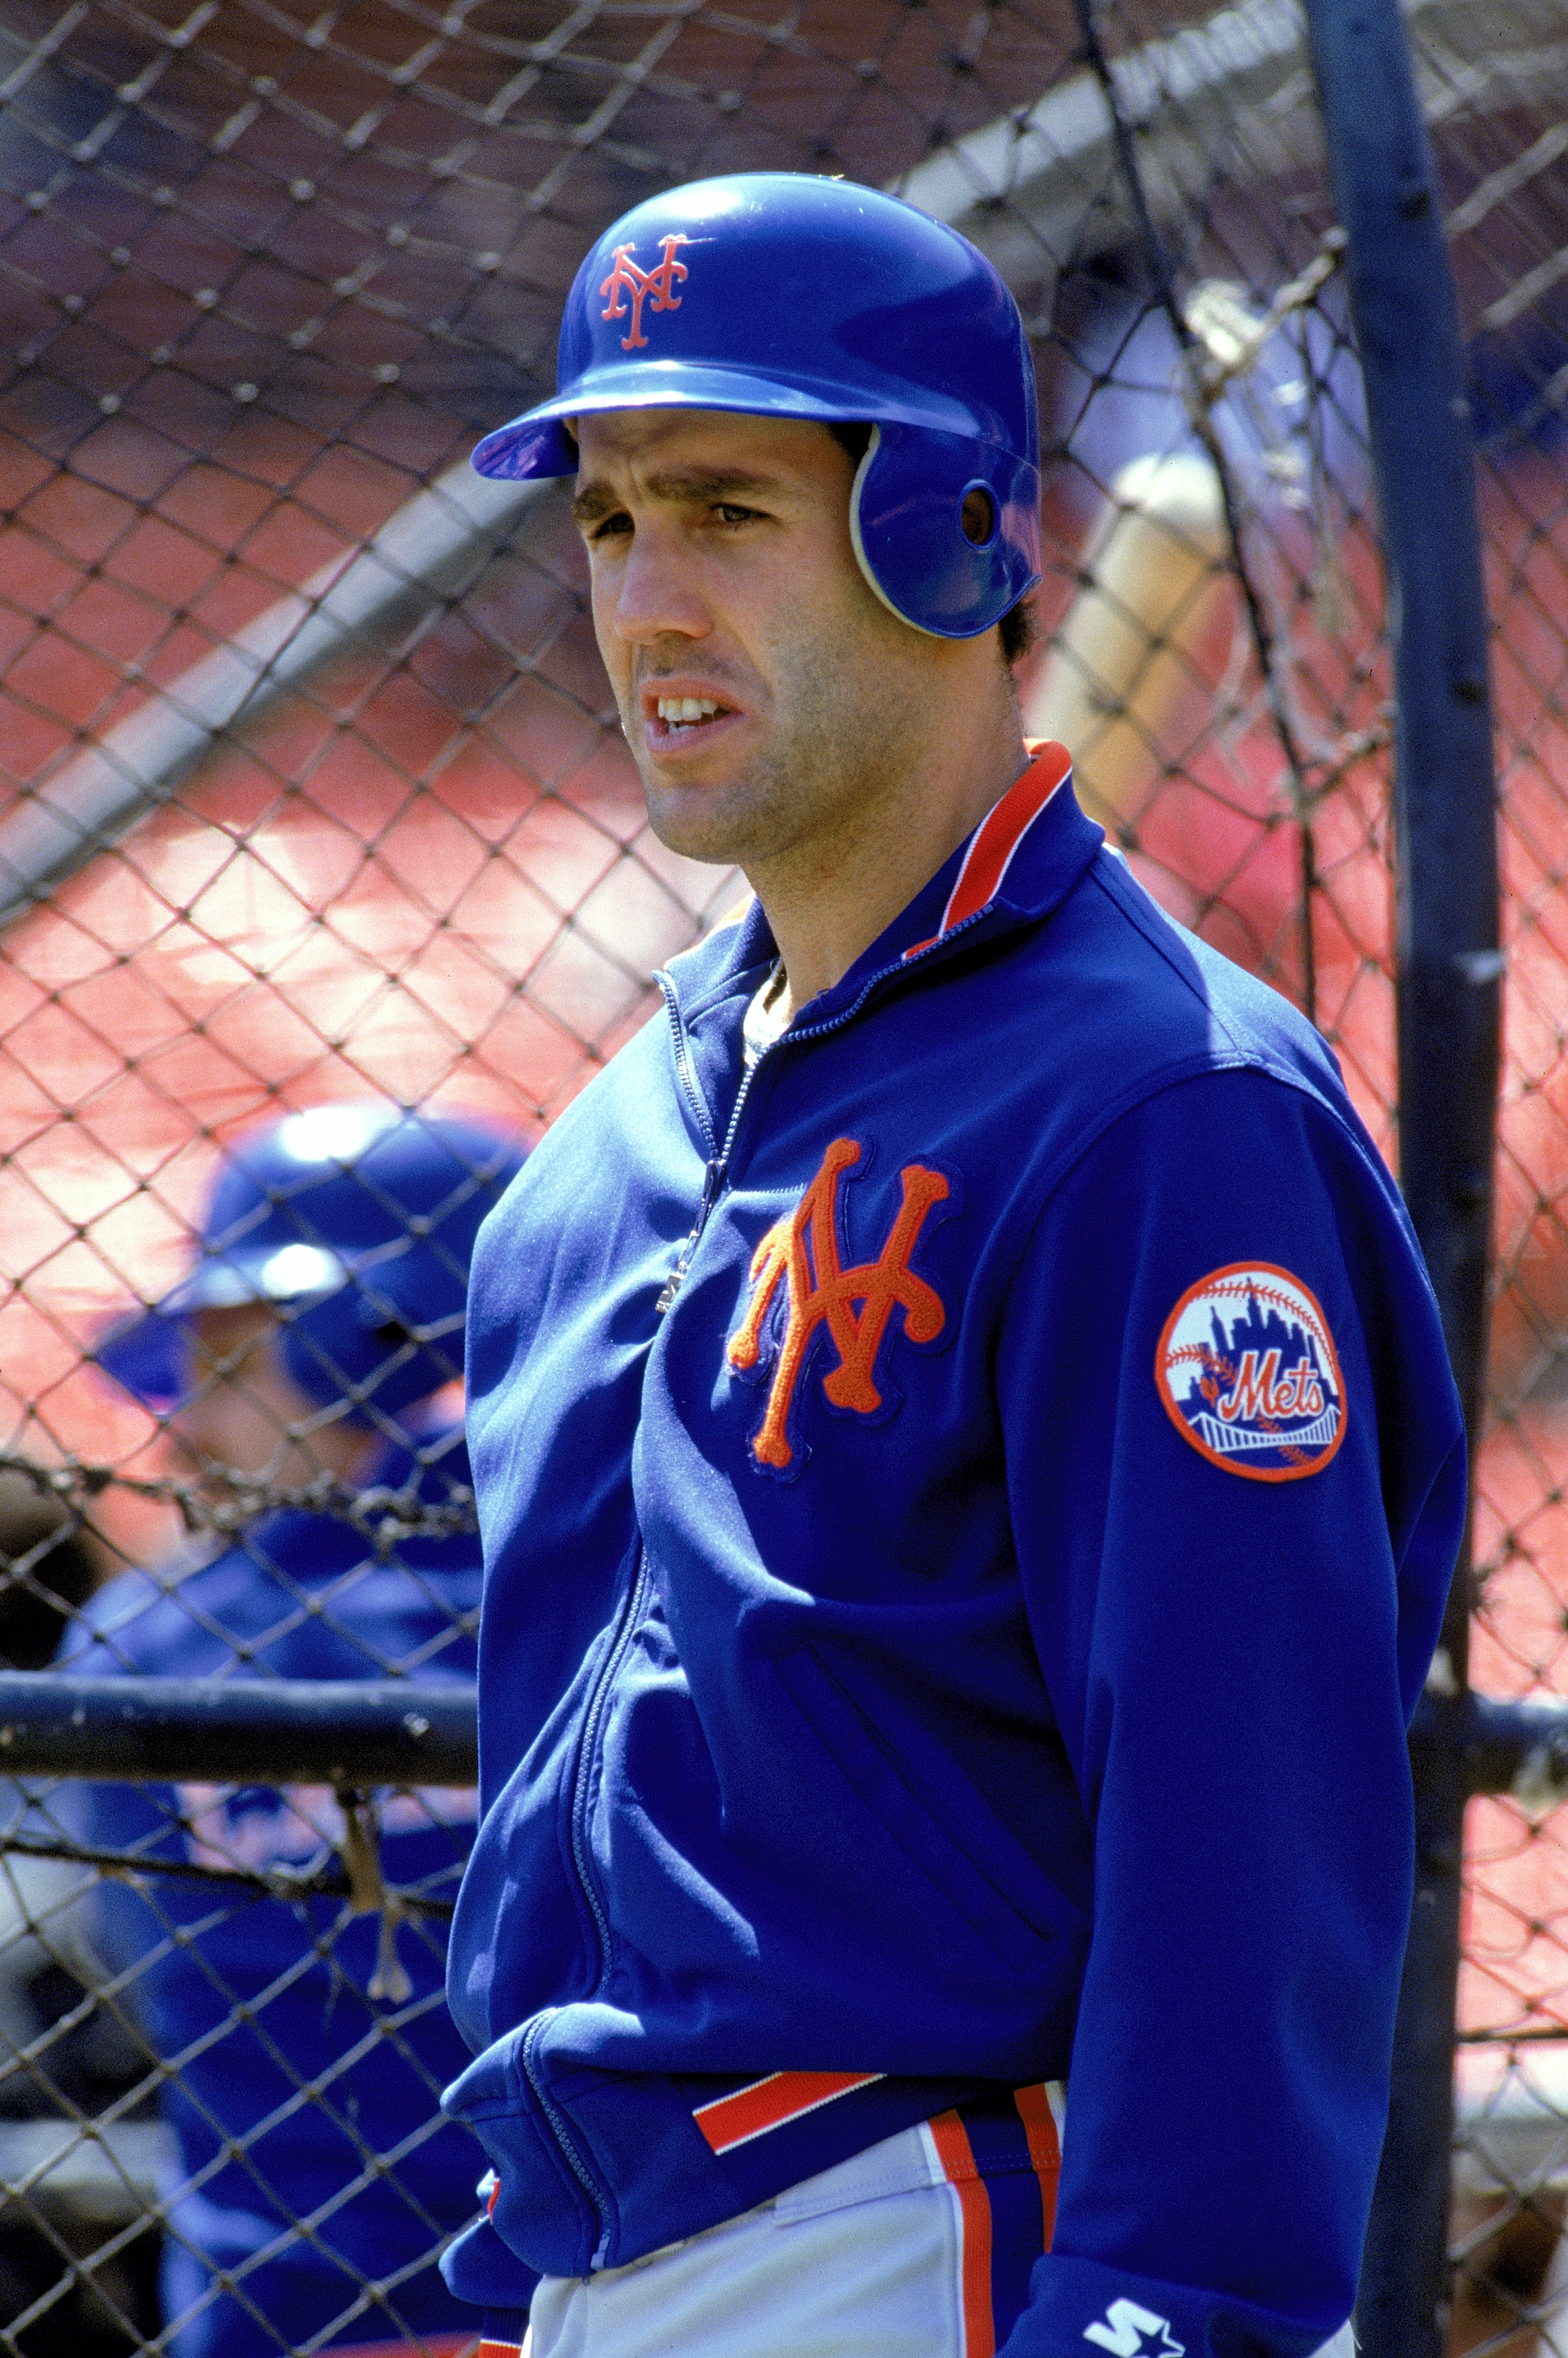 1990:  Mike Marshall of the New York Mets looks on during batting practice before a game in the 1990 season. (Photo by: Otto Greule Jr/Getty Images)